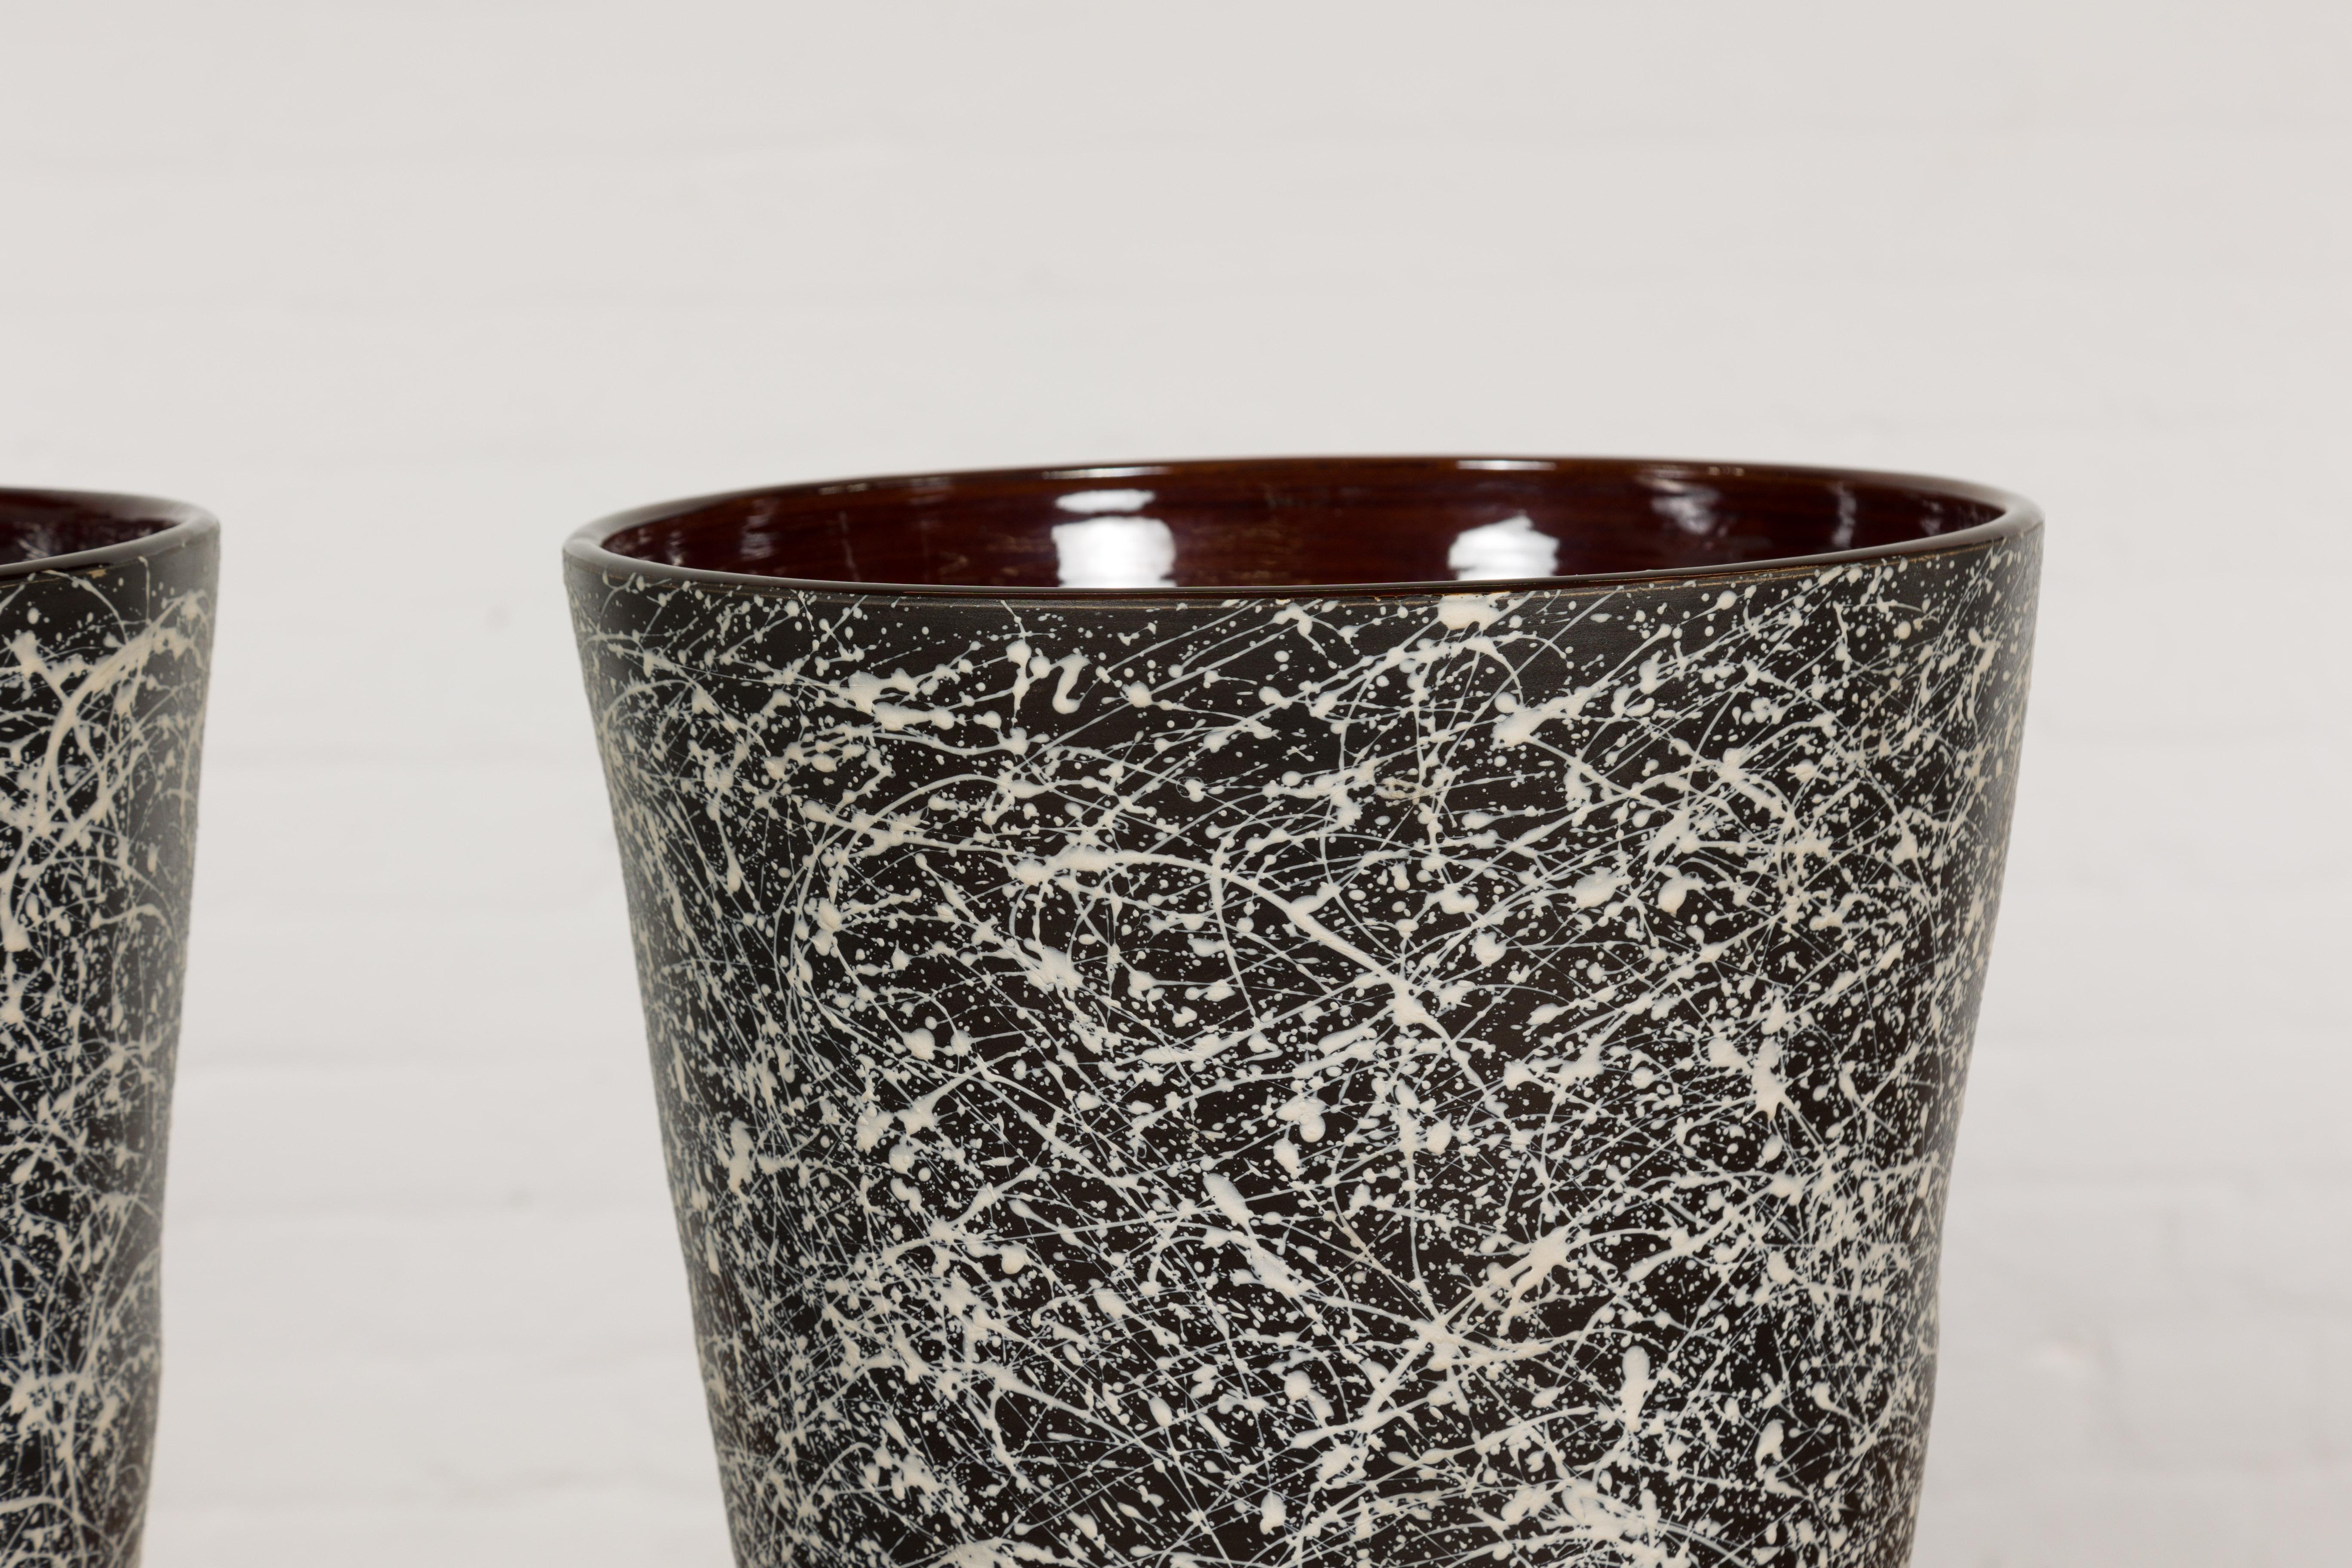 Pair of Textured Black & White Spattered Ceramic Vases In Excellent Condition For Sale In Yonkers, NY